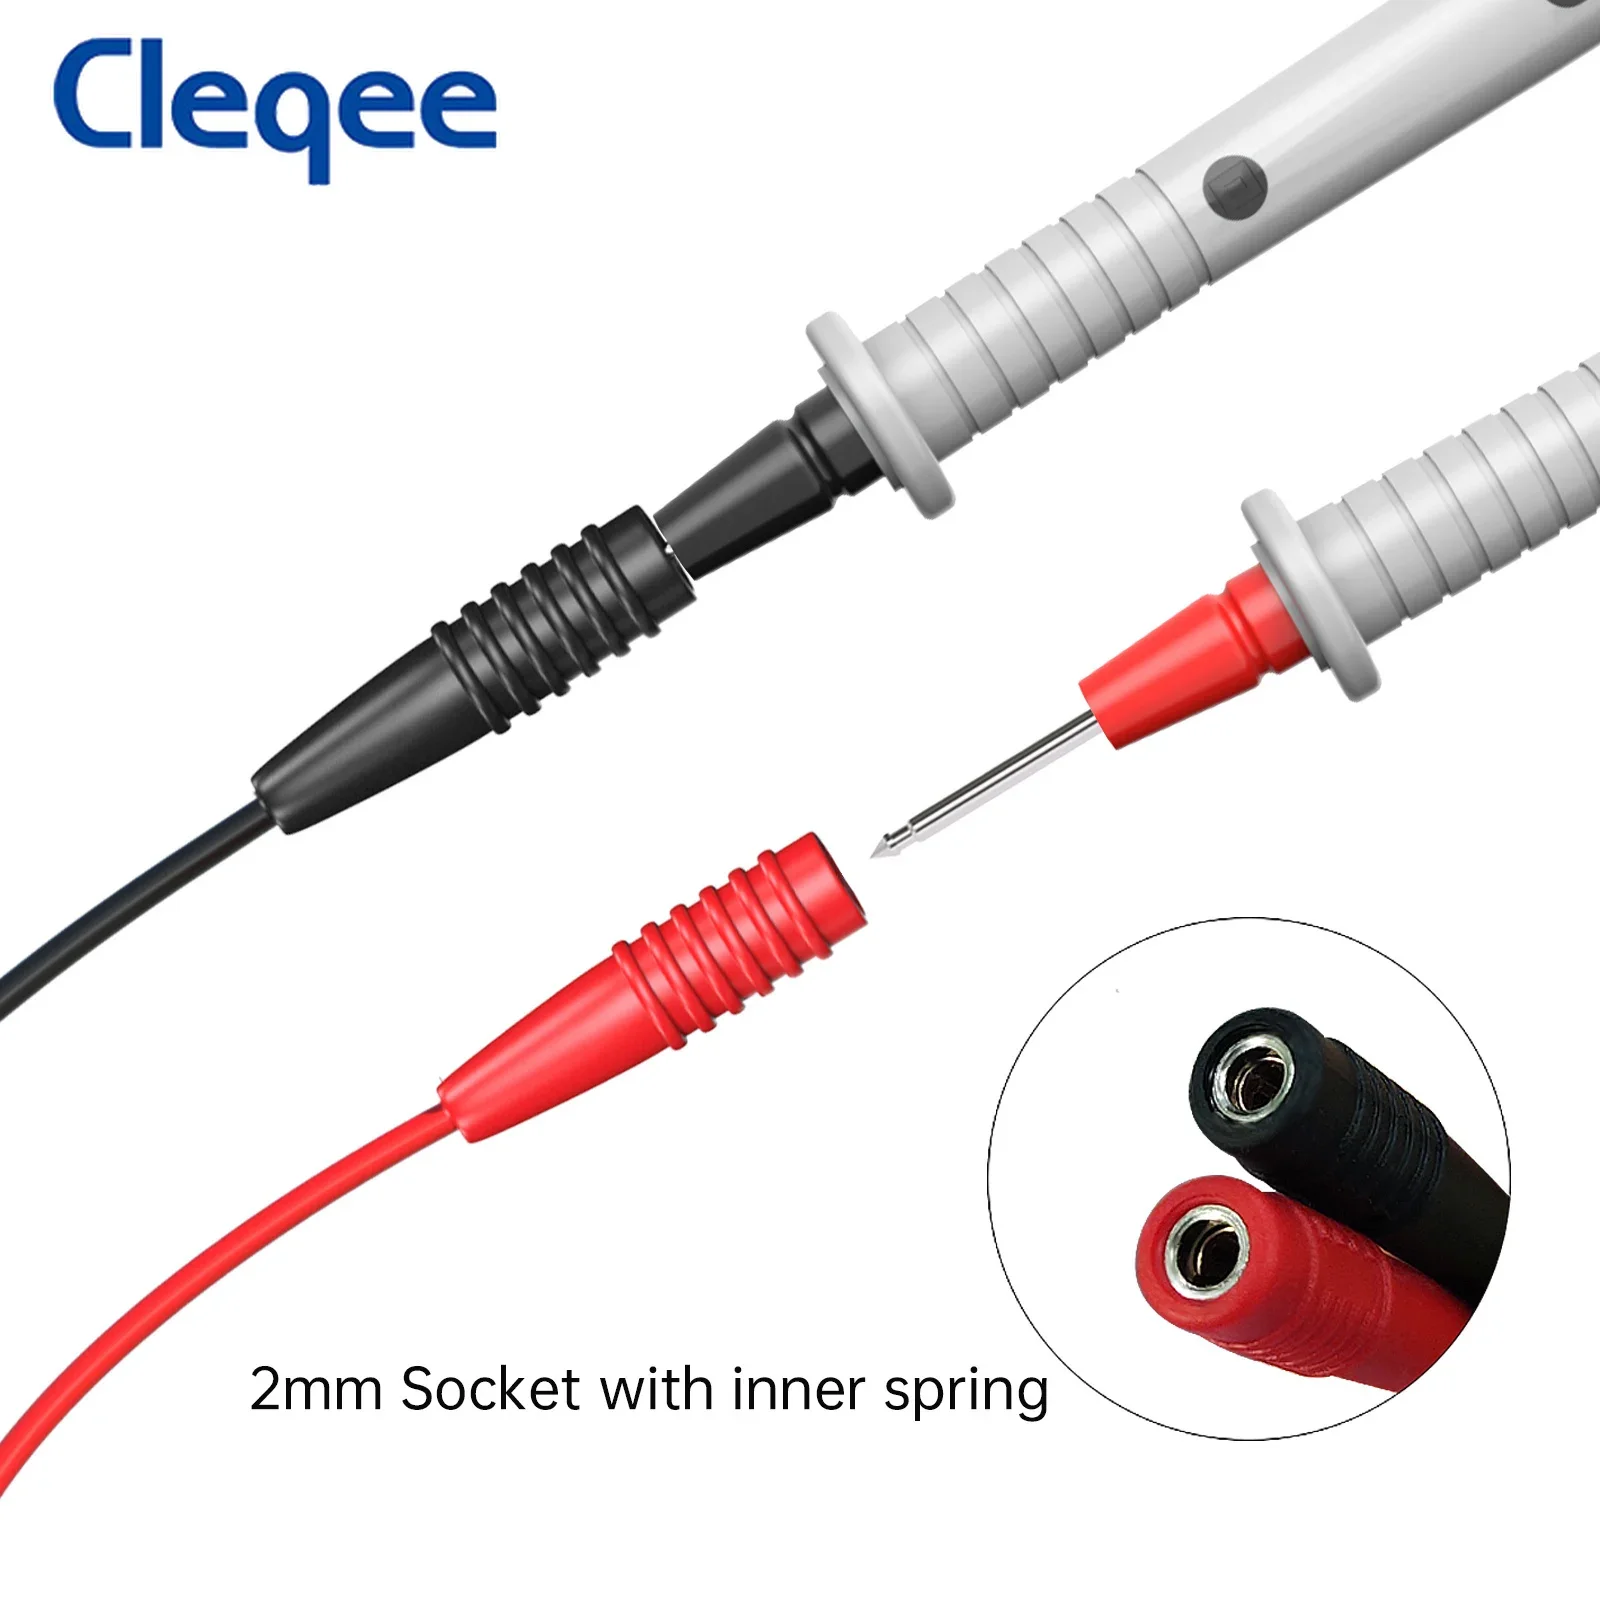 Cleqee P1046 2pcs 0.7mm Test Probe Cables Sharp Puncture Needles Pin Wires with 2mm Inner-spring Socket for Elactrical Testing